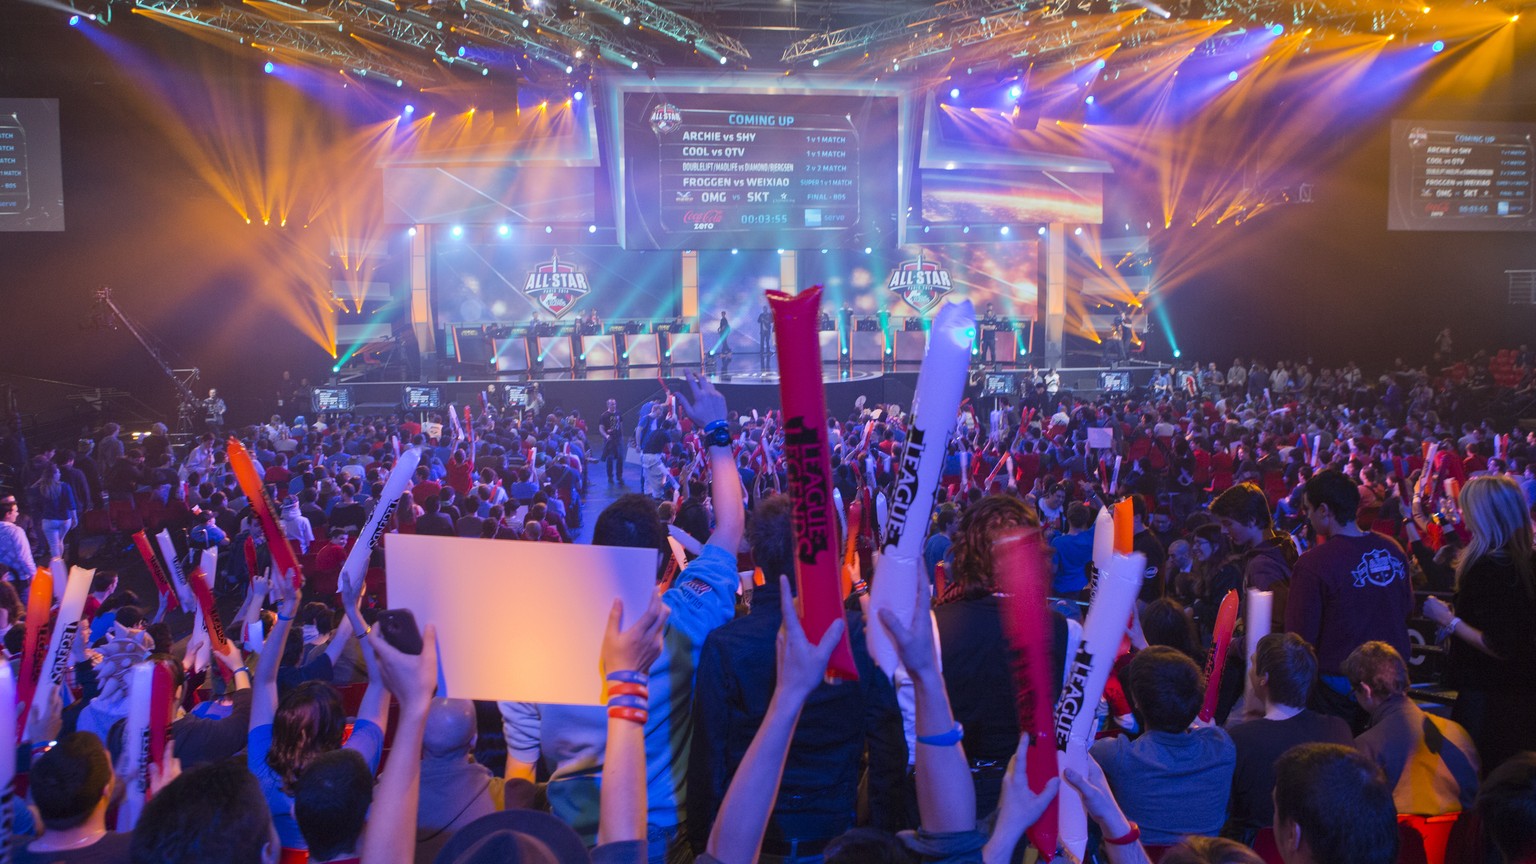 FILE - In this May 11, 2014 file photo, fans watch the opening ceremony of the League of Legends season 4 World Championship Final between South Korea against China&#039;s Royal Club, in Paris. The ne ...